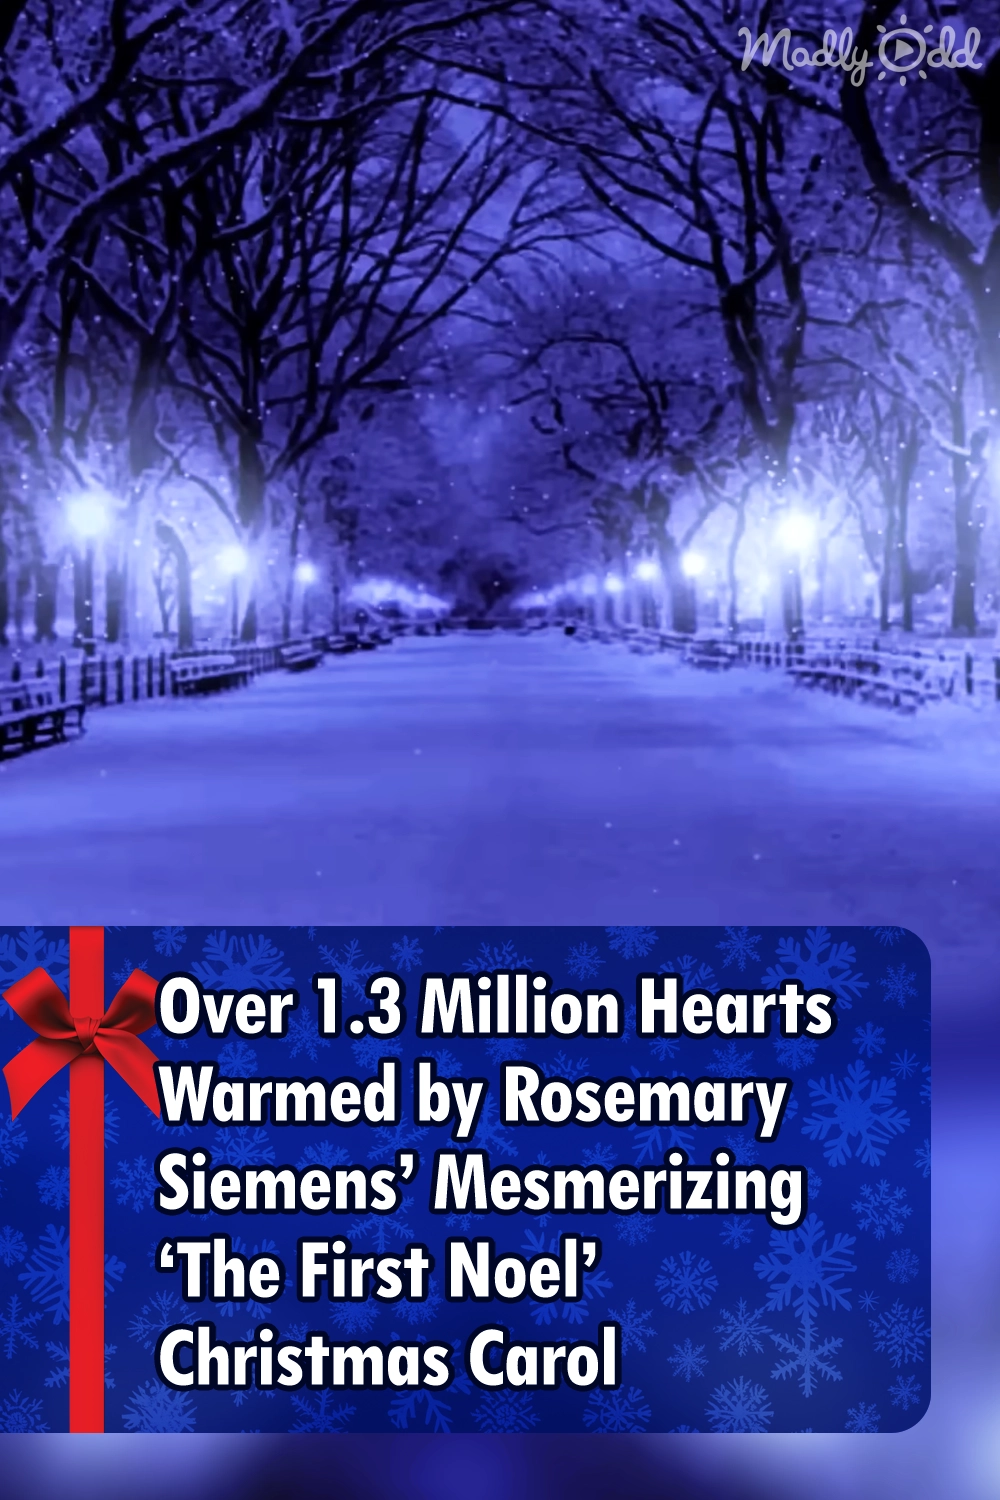 Over 1.3 Million Hearts Warmed by Rosemary Siemens’ Mesmerizing ‘The First Noel’ Christmas Carol